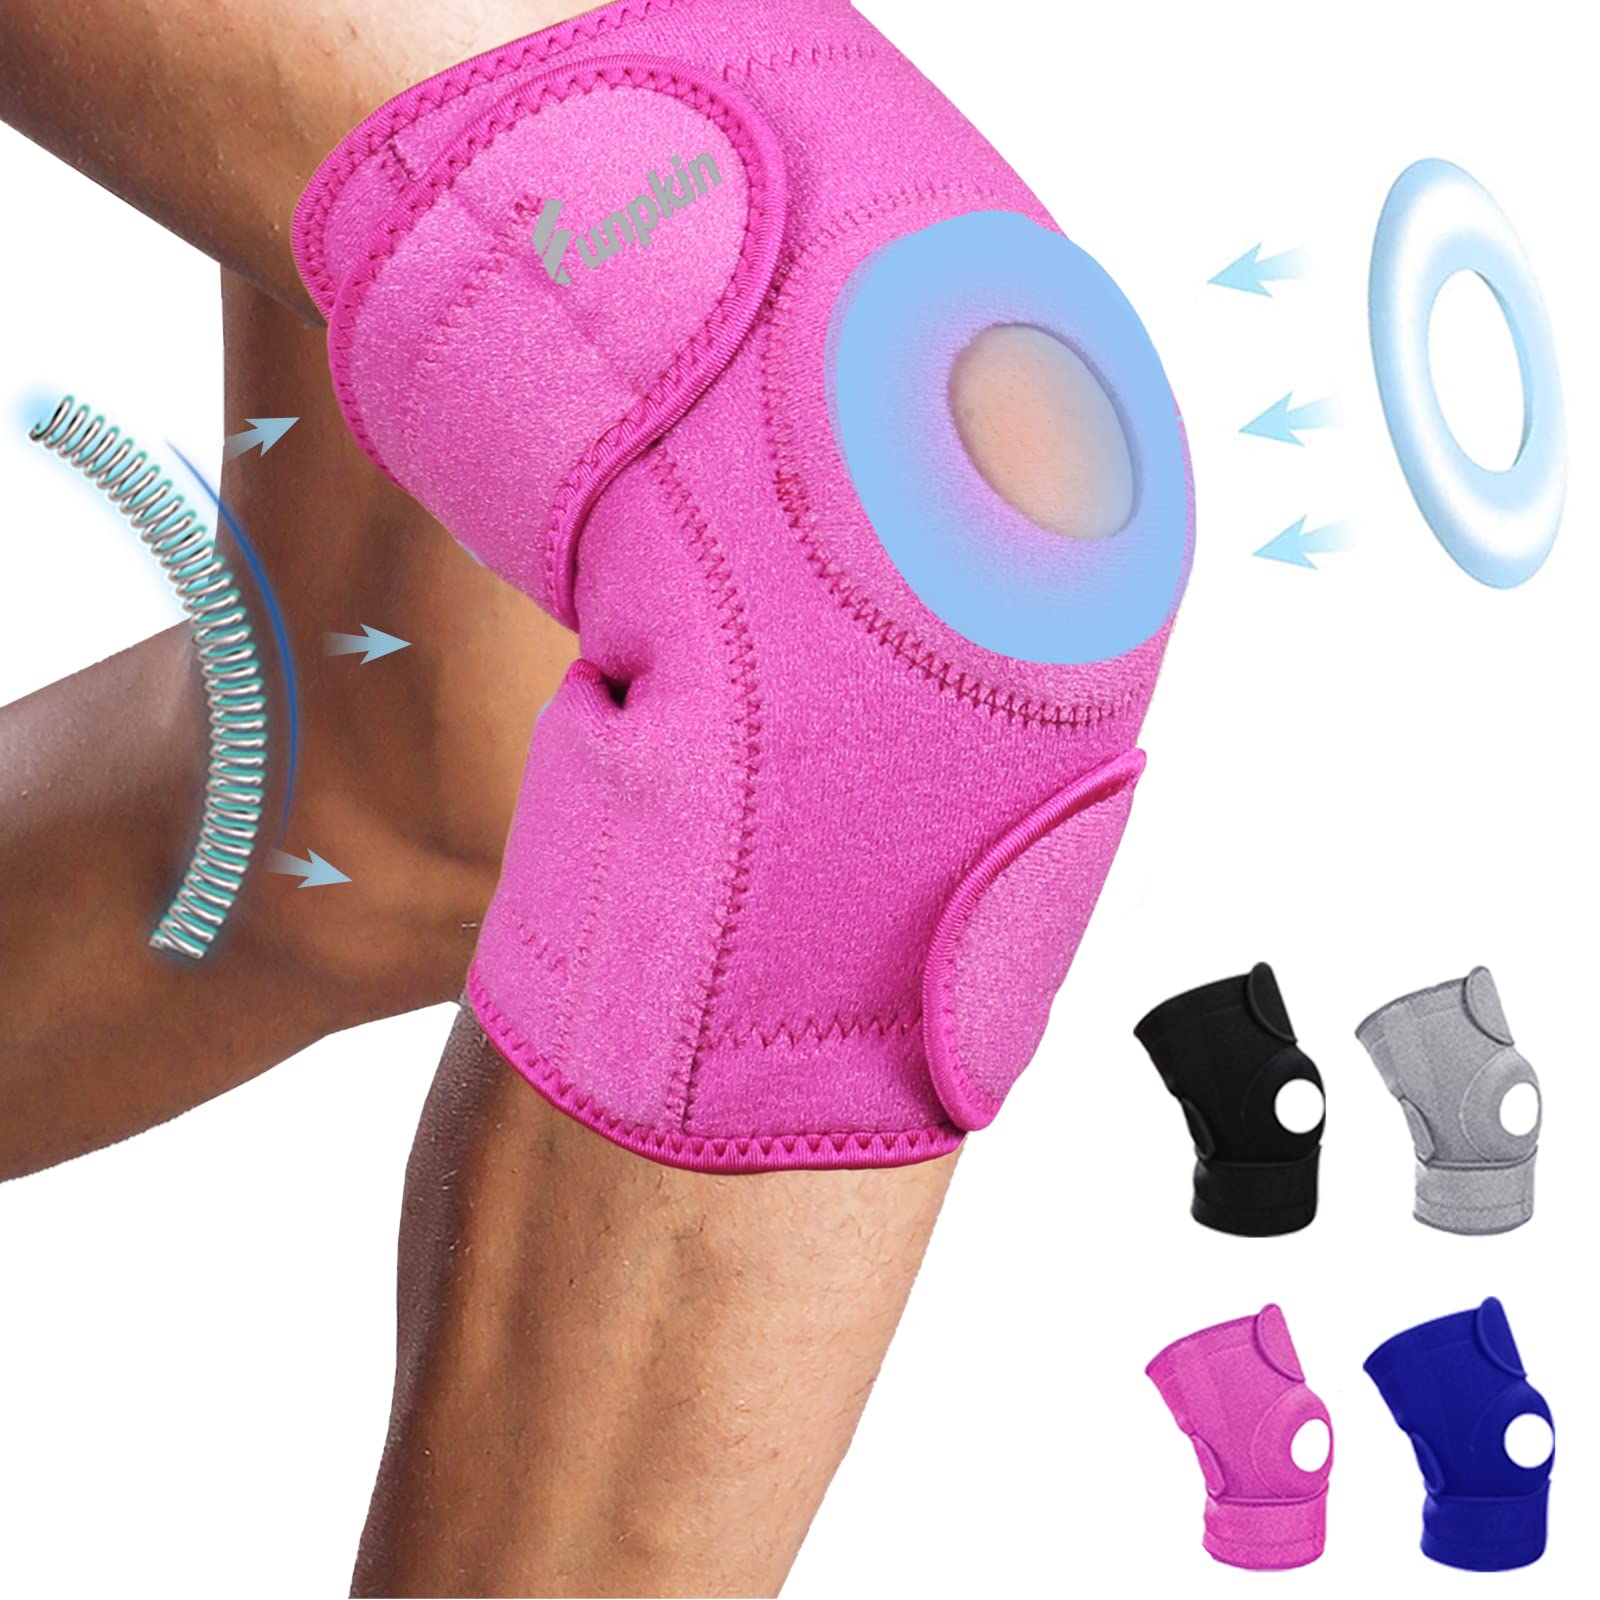 Adjustable Knee Support PatellaKnee Cap for Knee Pain, Gym Workout,  Running, Arthritis, and Protection